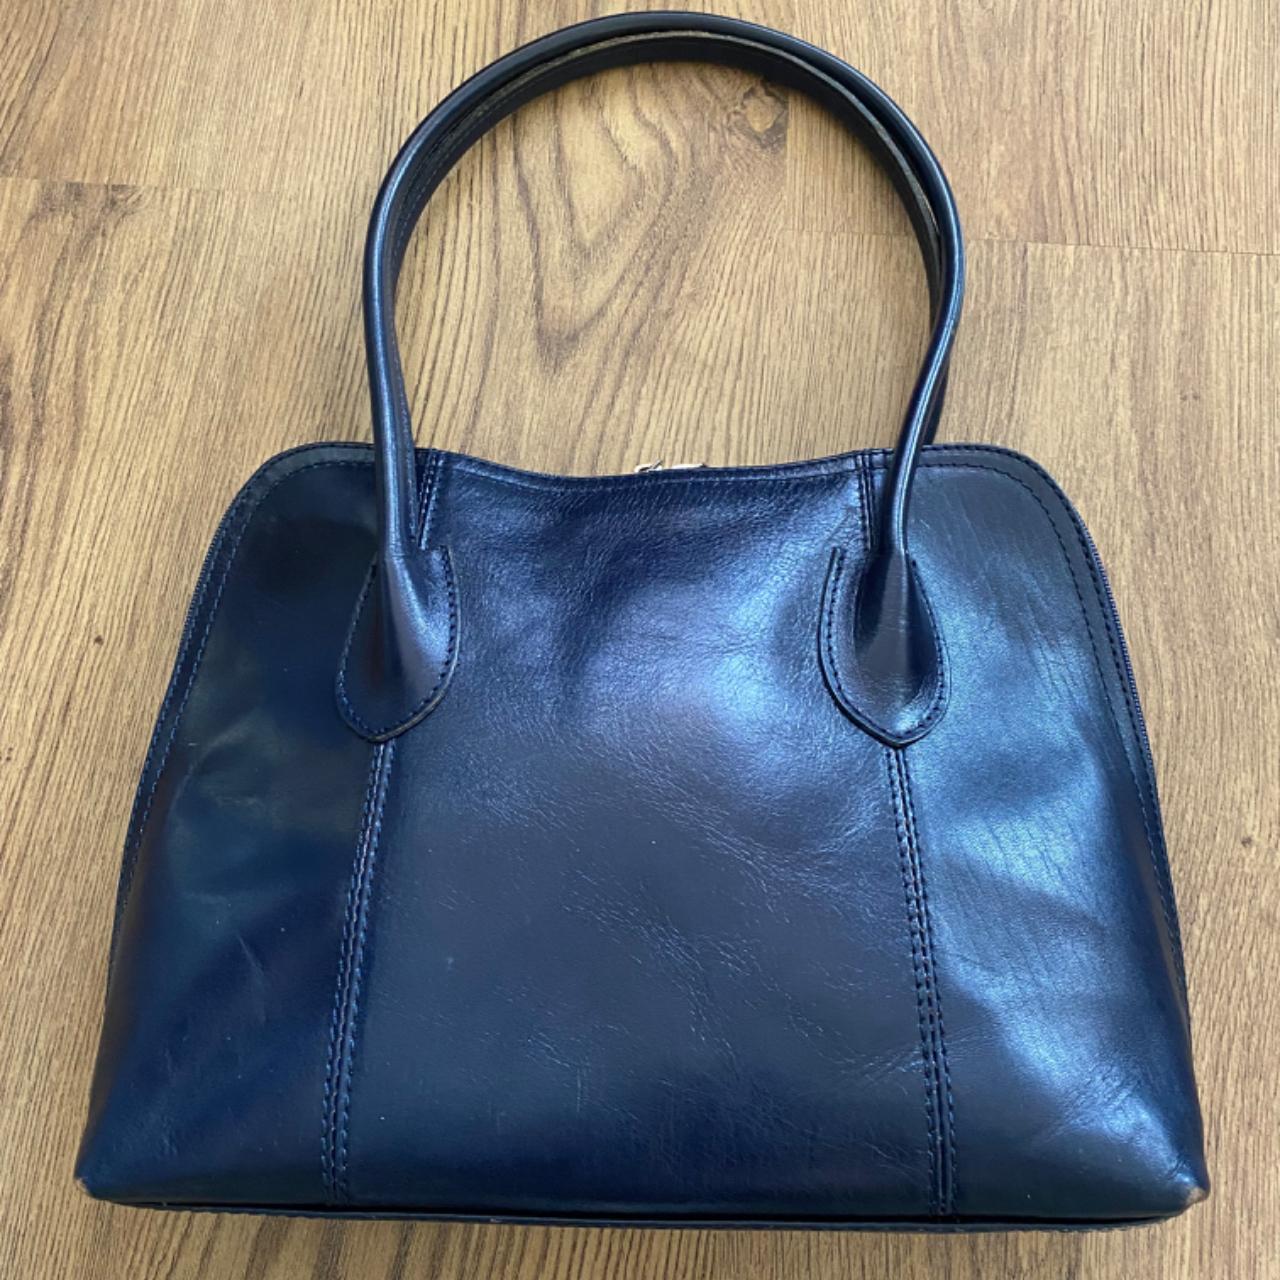 Navy blue leather Vera Pelle purse 80s vintage made in Italy bag